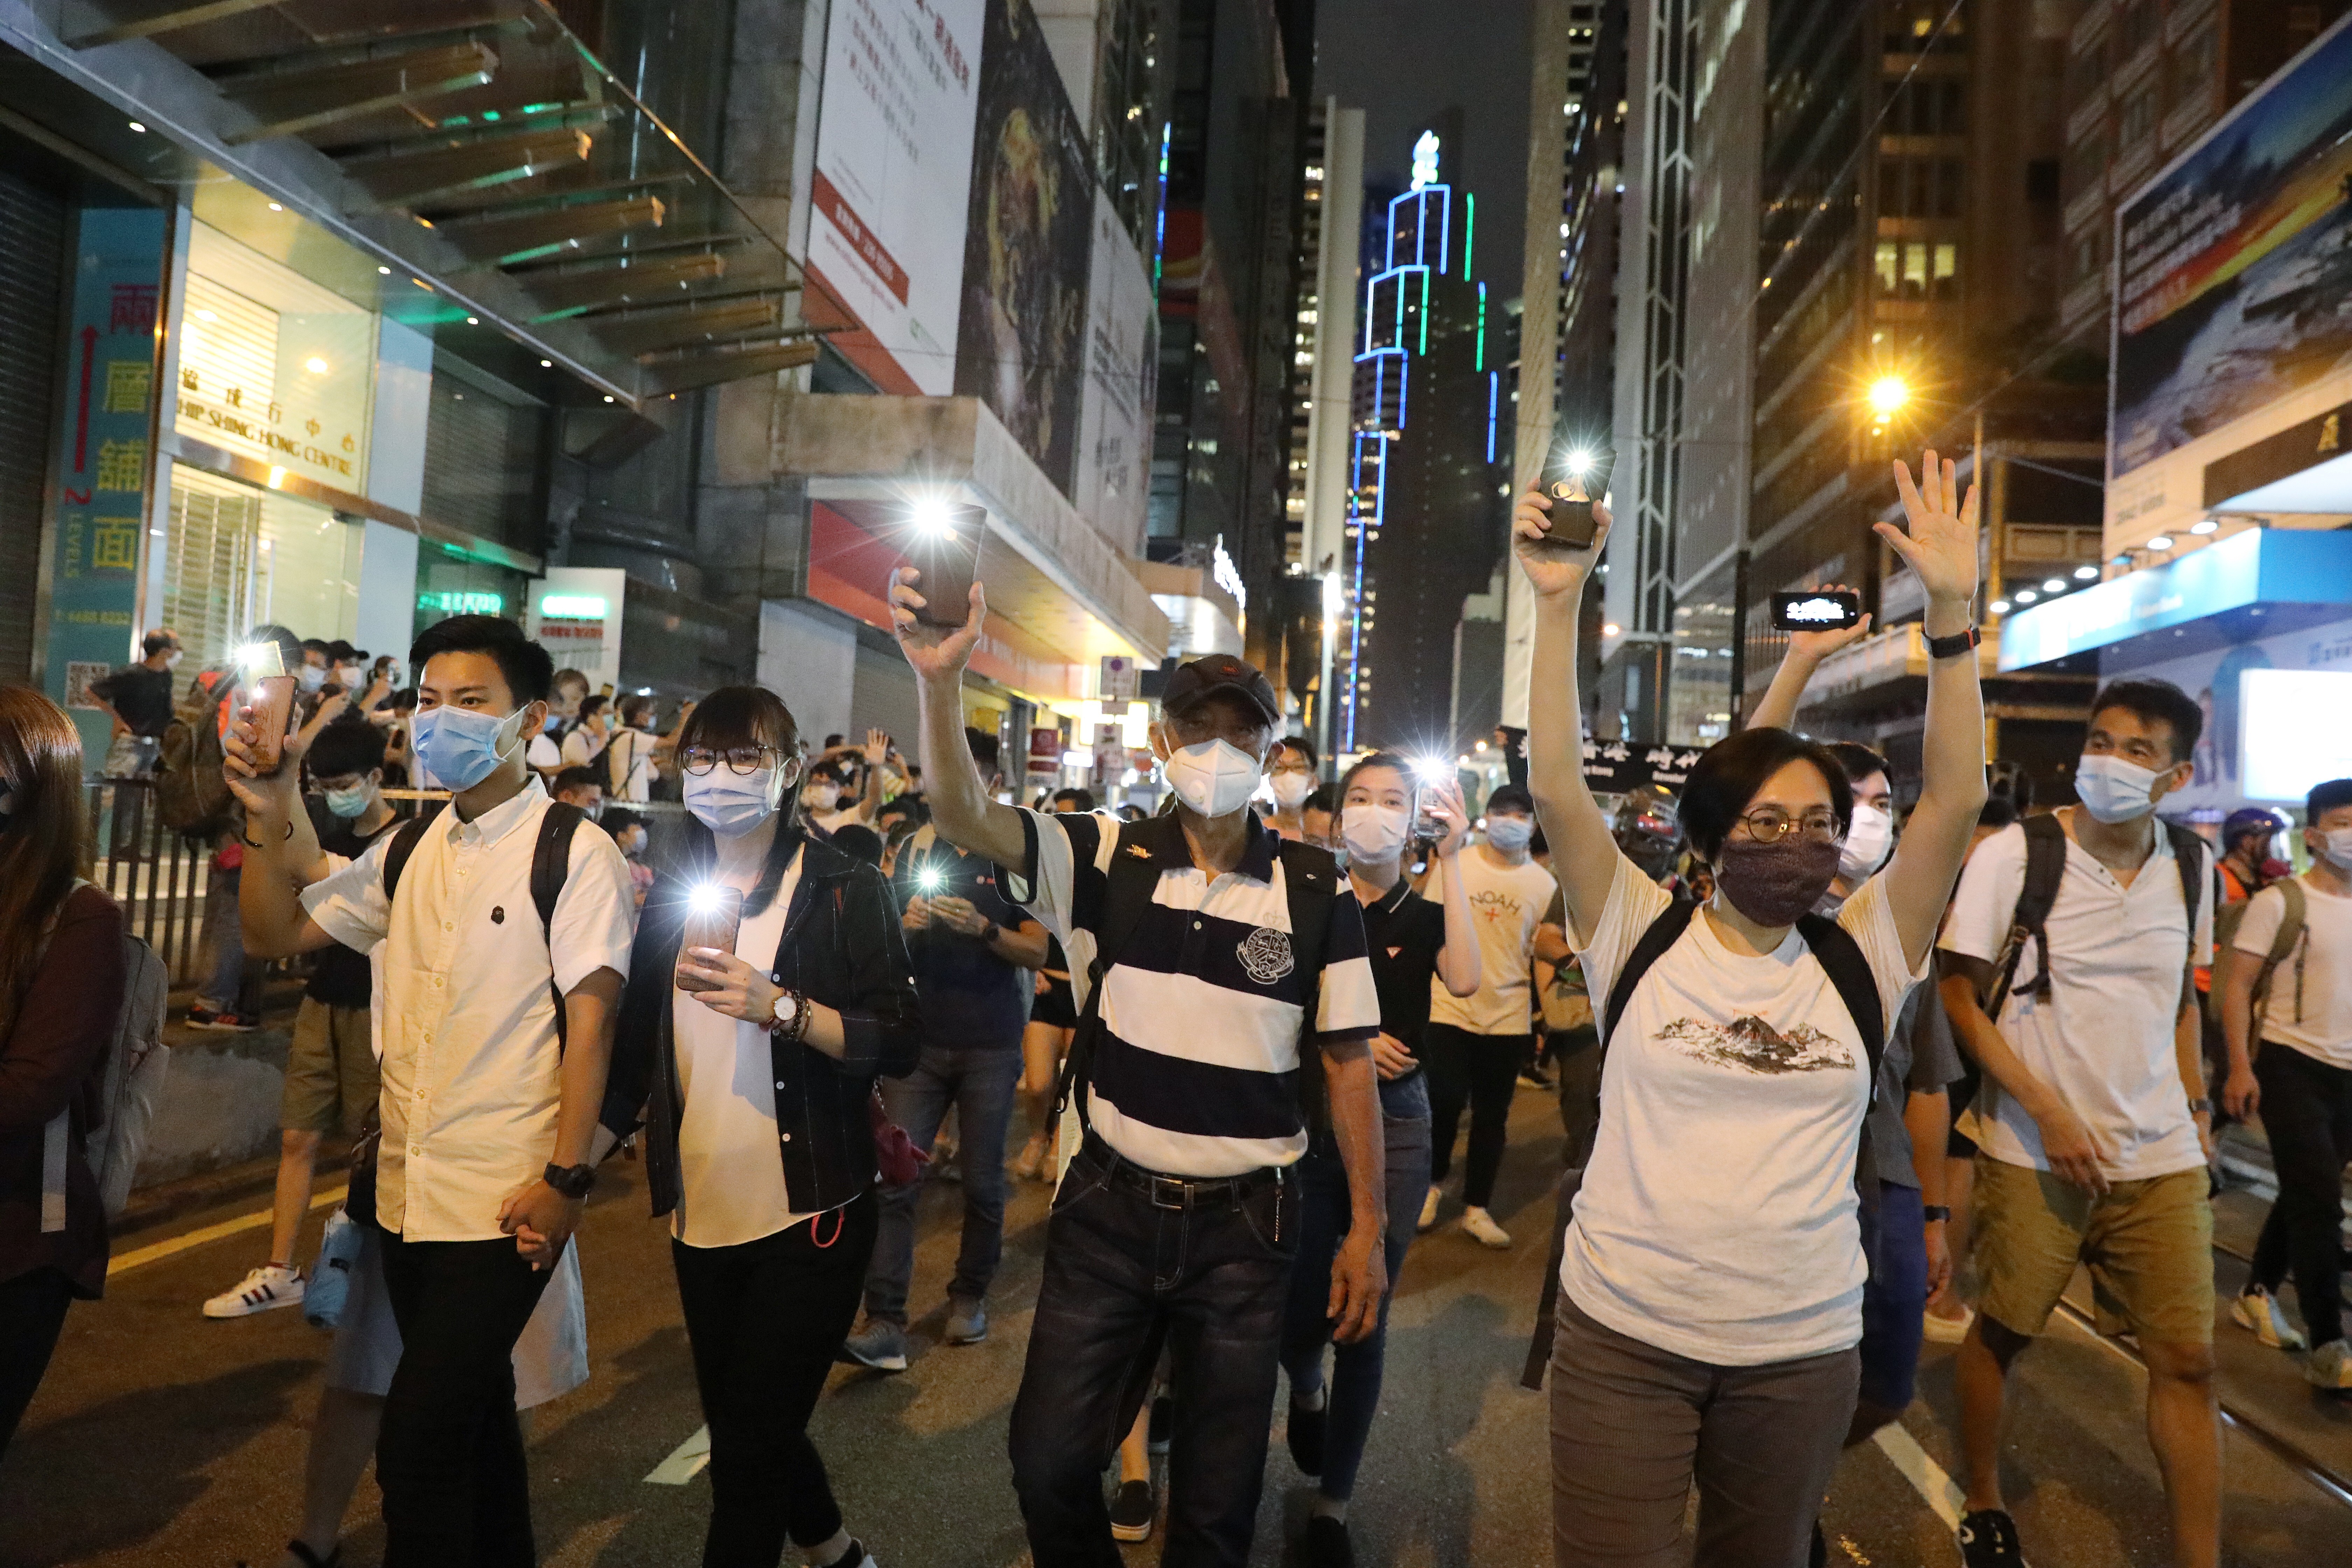 Demonstrators hold up their phones during a procession in Central on June 9 to mark the first anniversary of the protests against the Hong Kong government. Photo: Dickson Lee